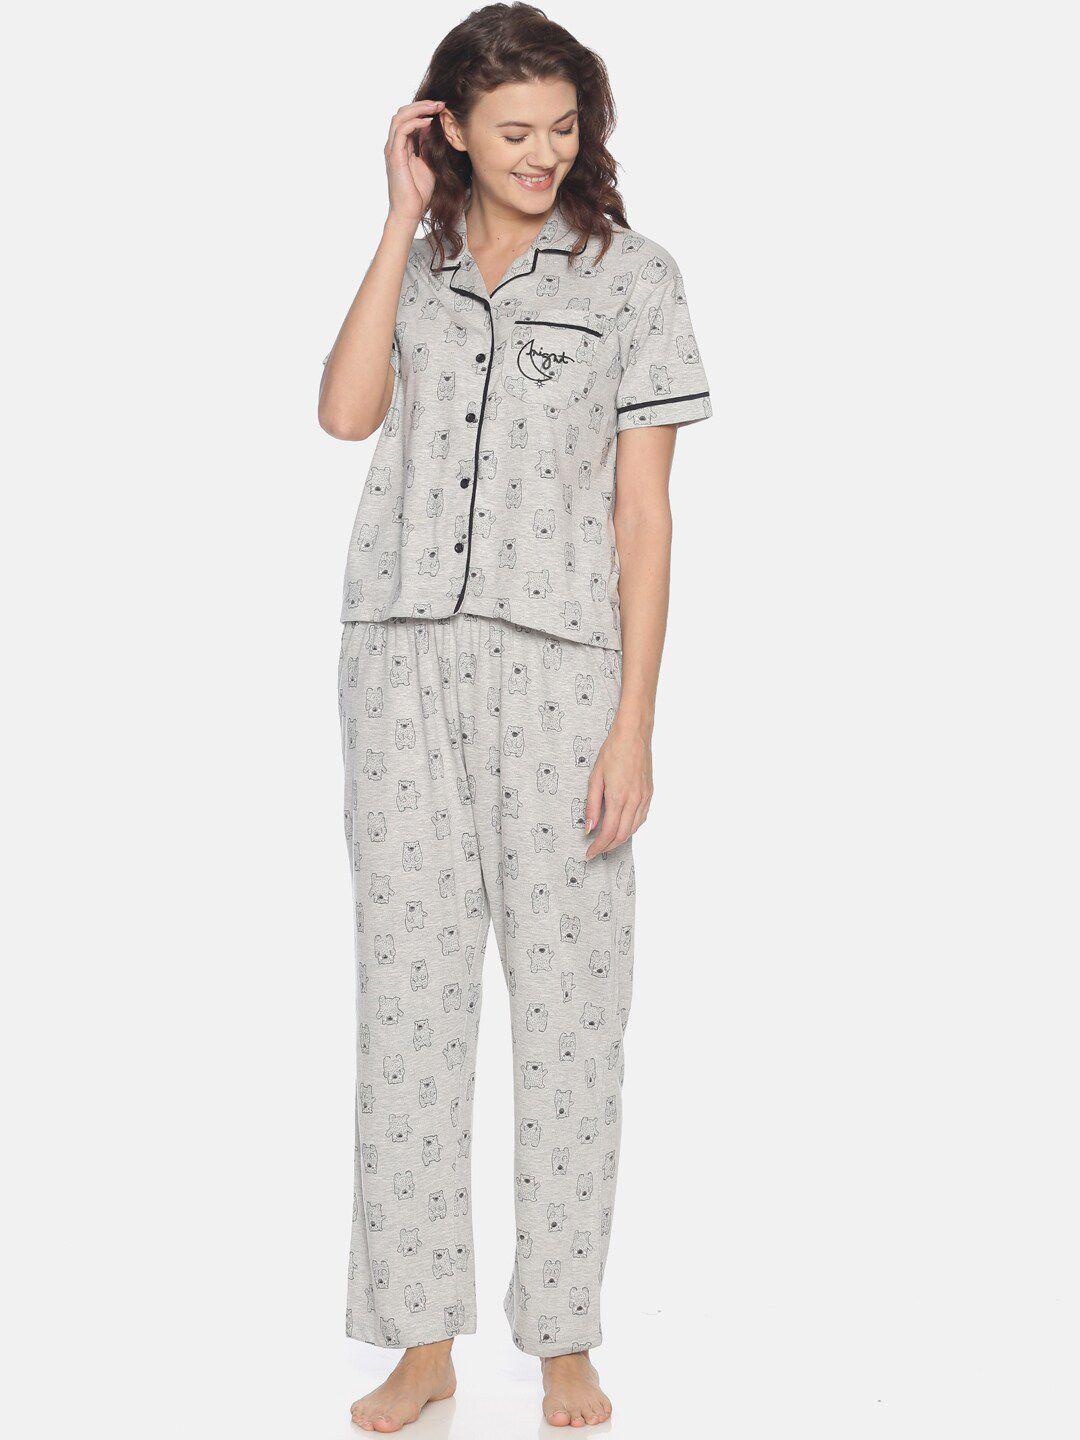 campus sutra women grey & black printed pure cotton night suit